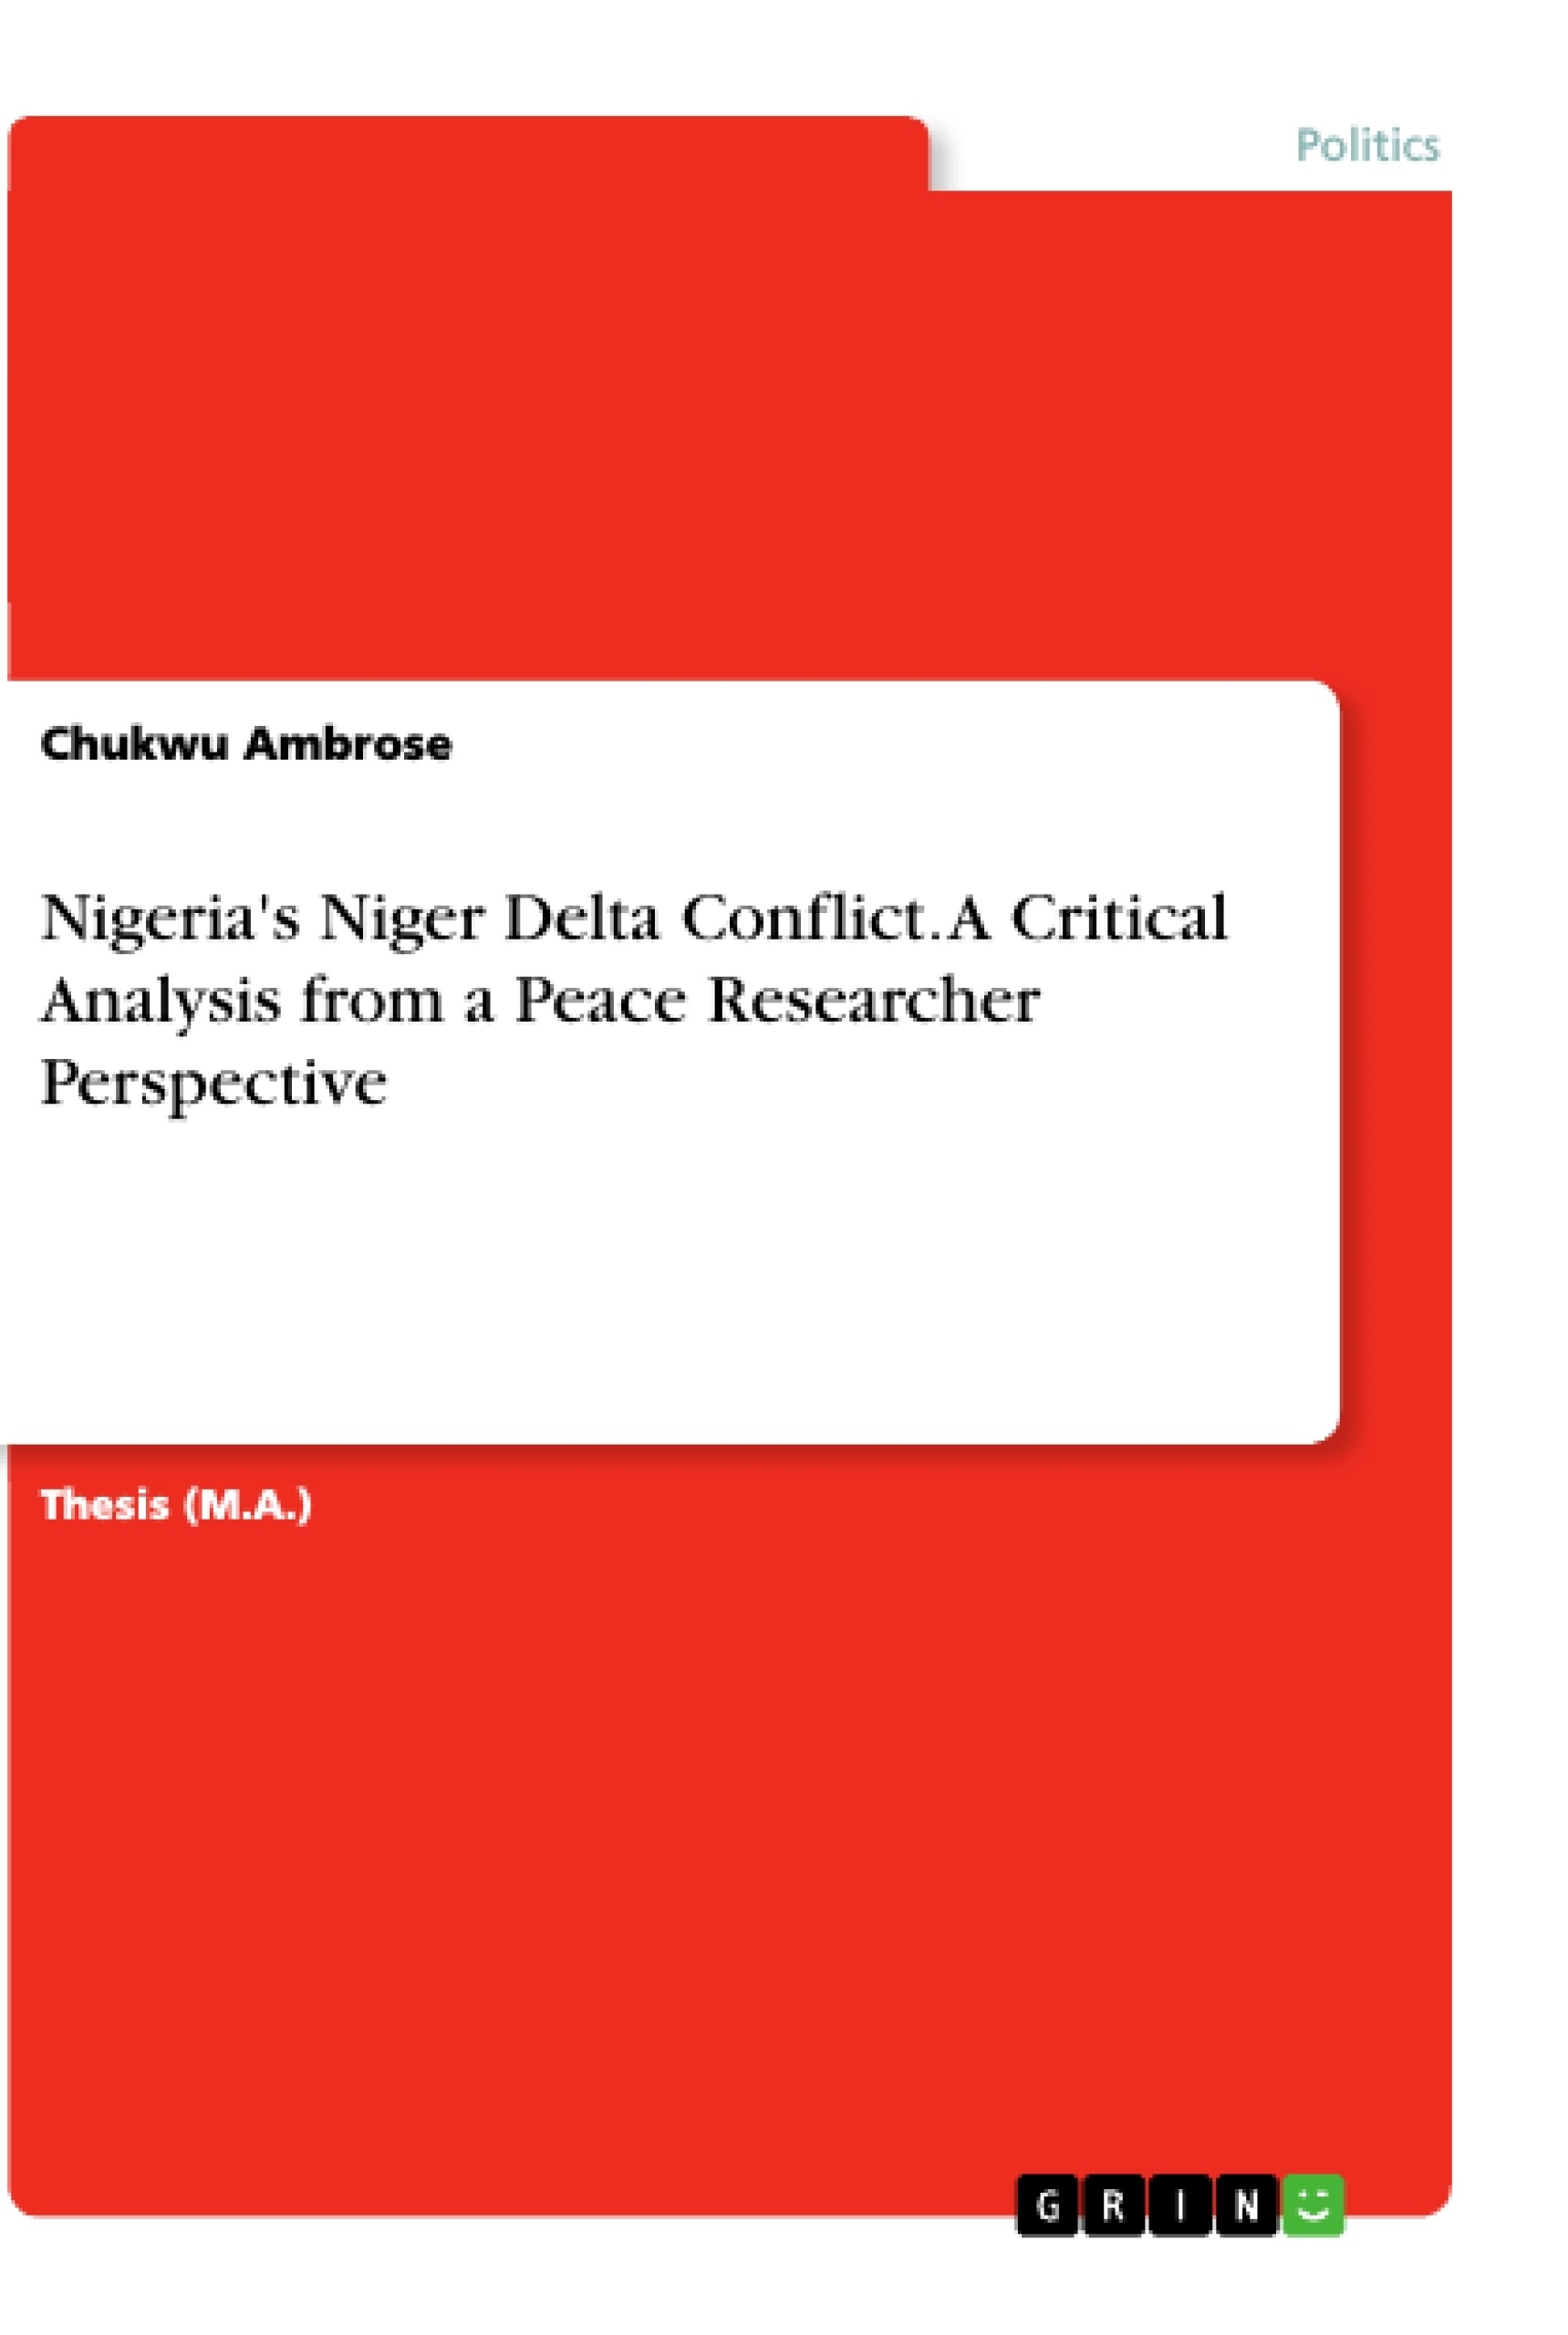 Título: Nigeria's Niger Delta Conflict. A Critical Analysis from a Peace Researcher Perspective